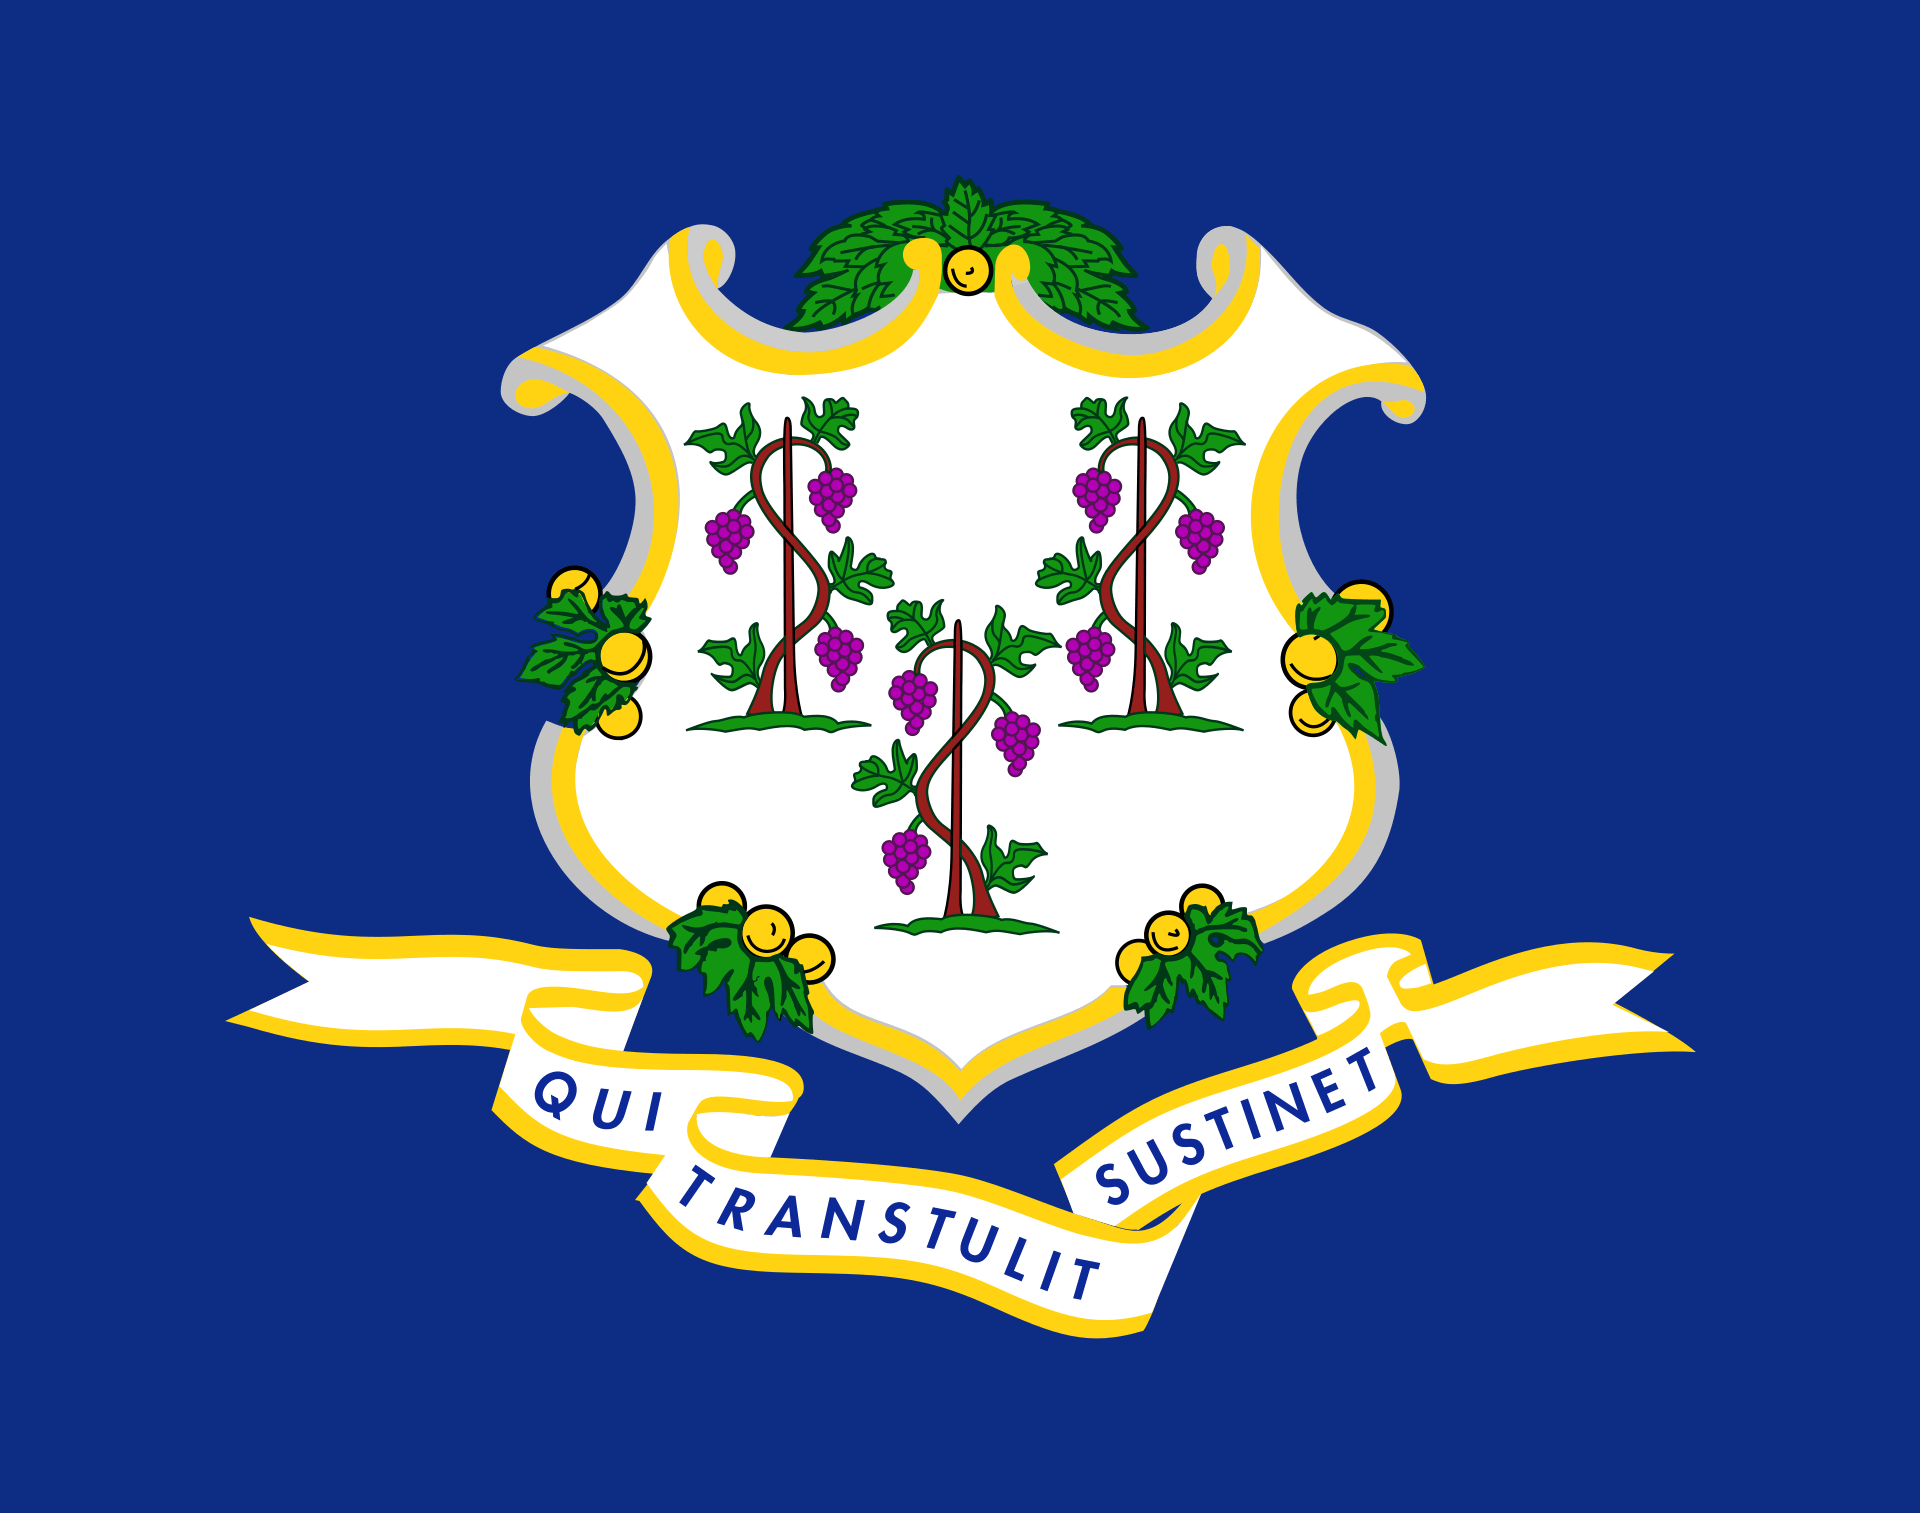 The Connecticut state flag design